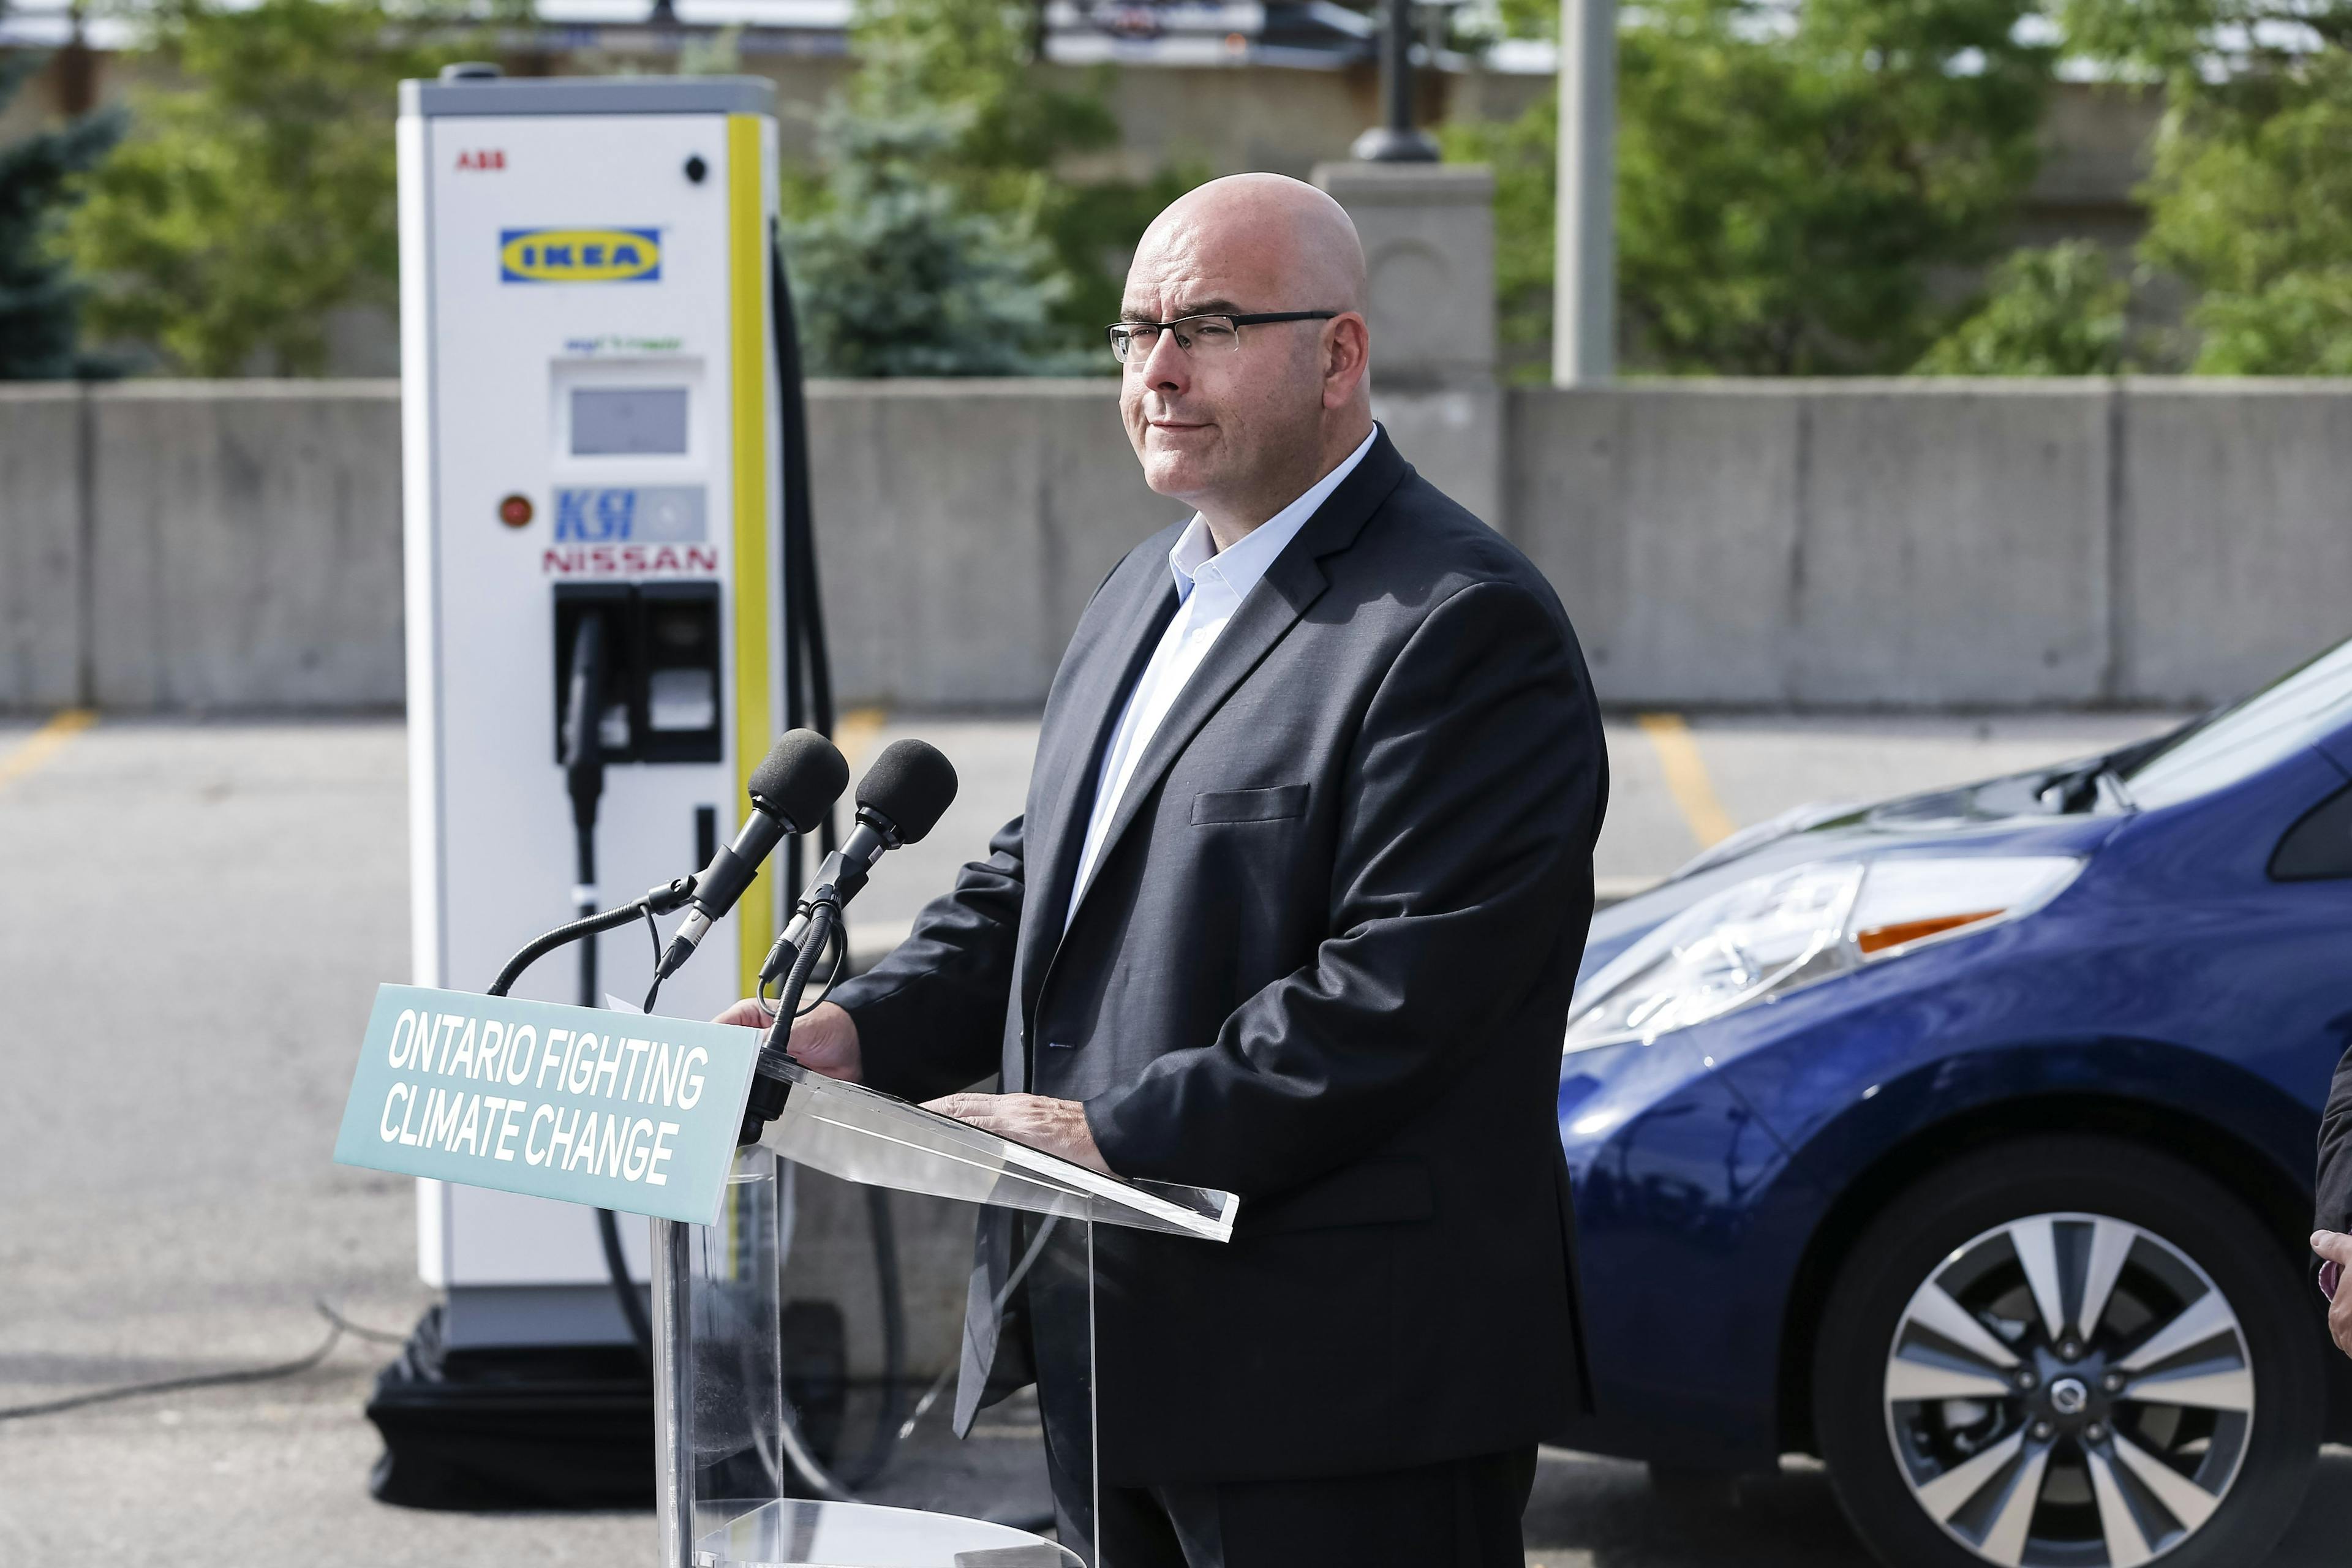 Del Duca backs $8,000 subsidies for electric vehicles